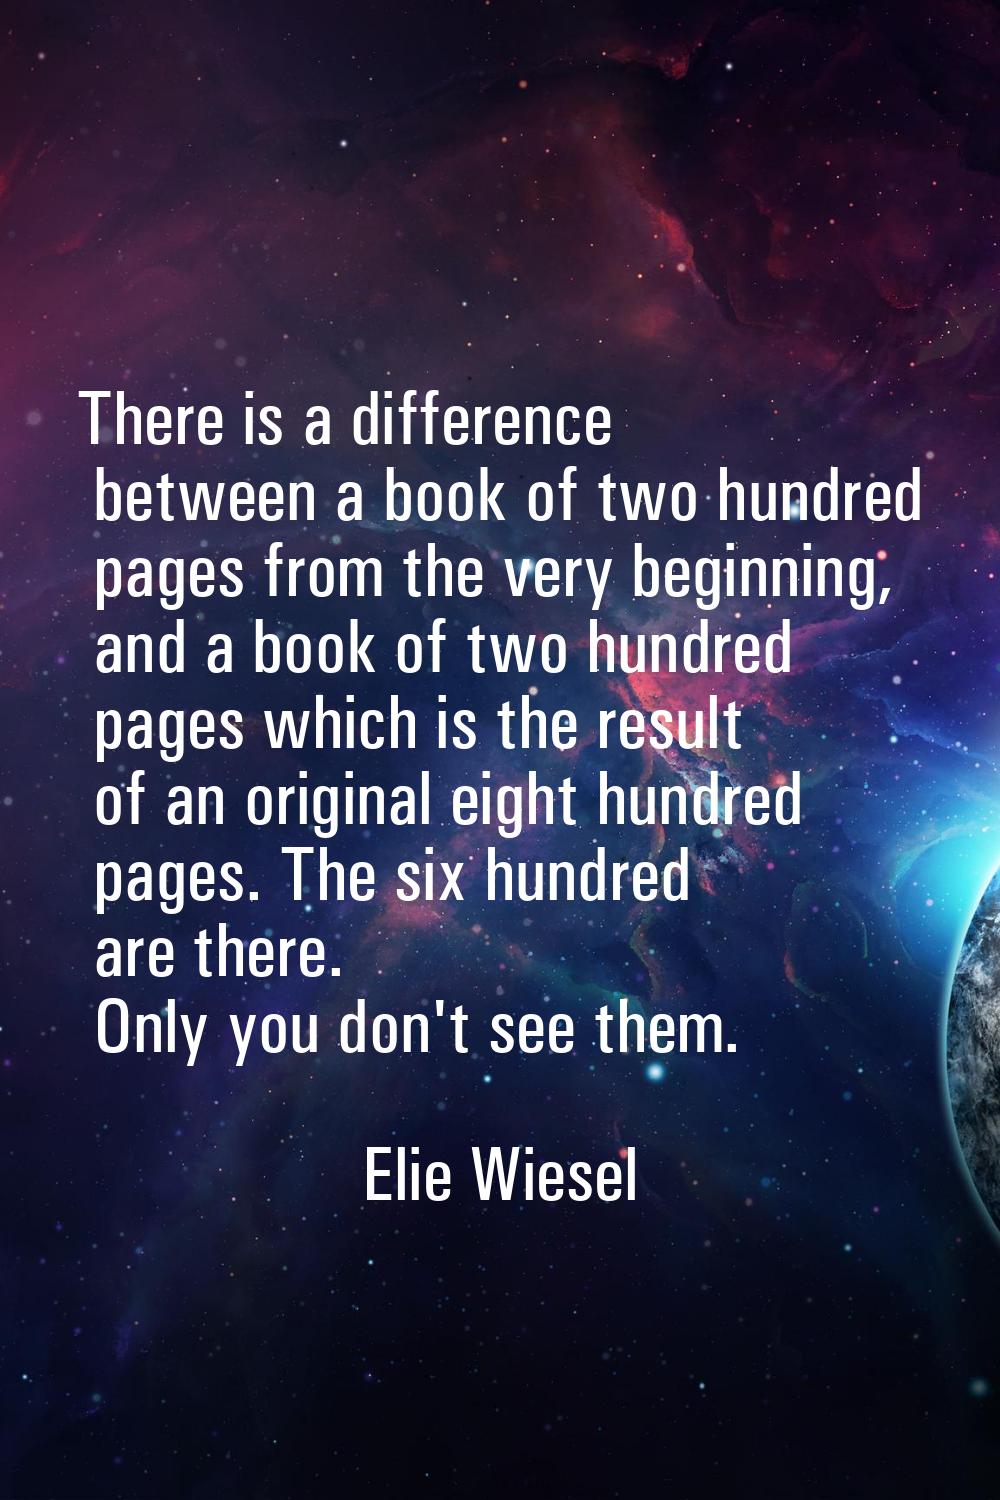 There is a difference between a book of two hundred pages from the very beginning, and a book of tw